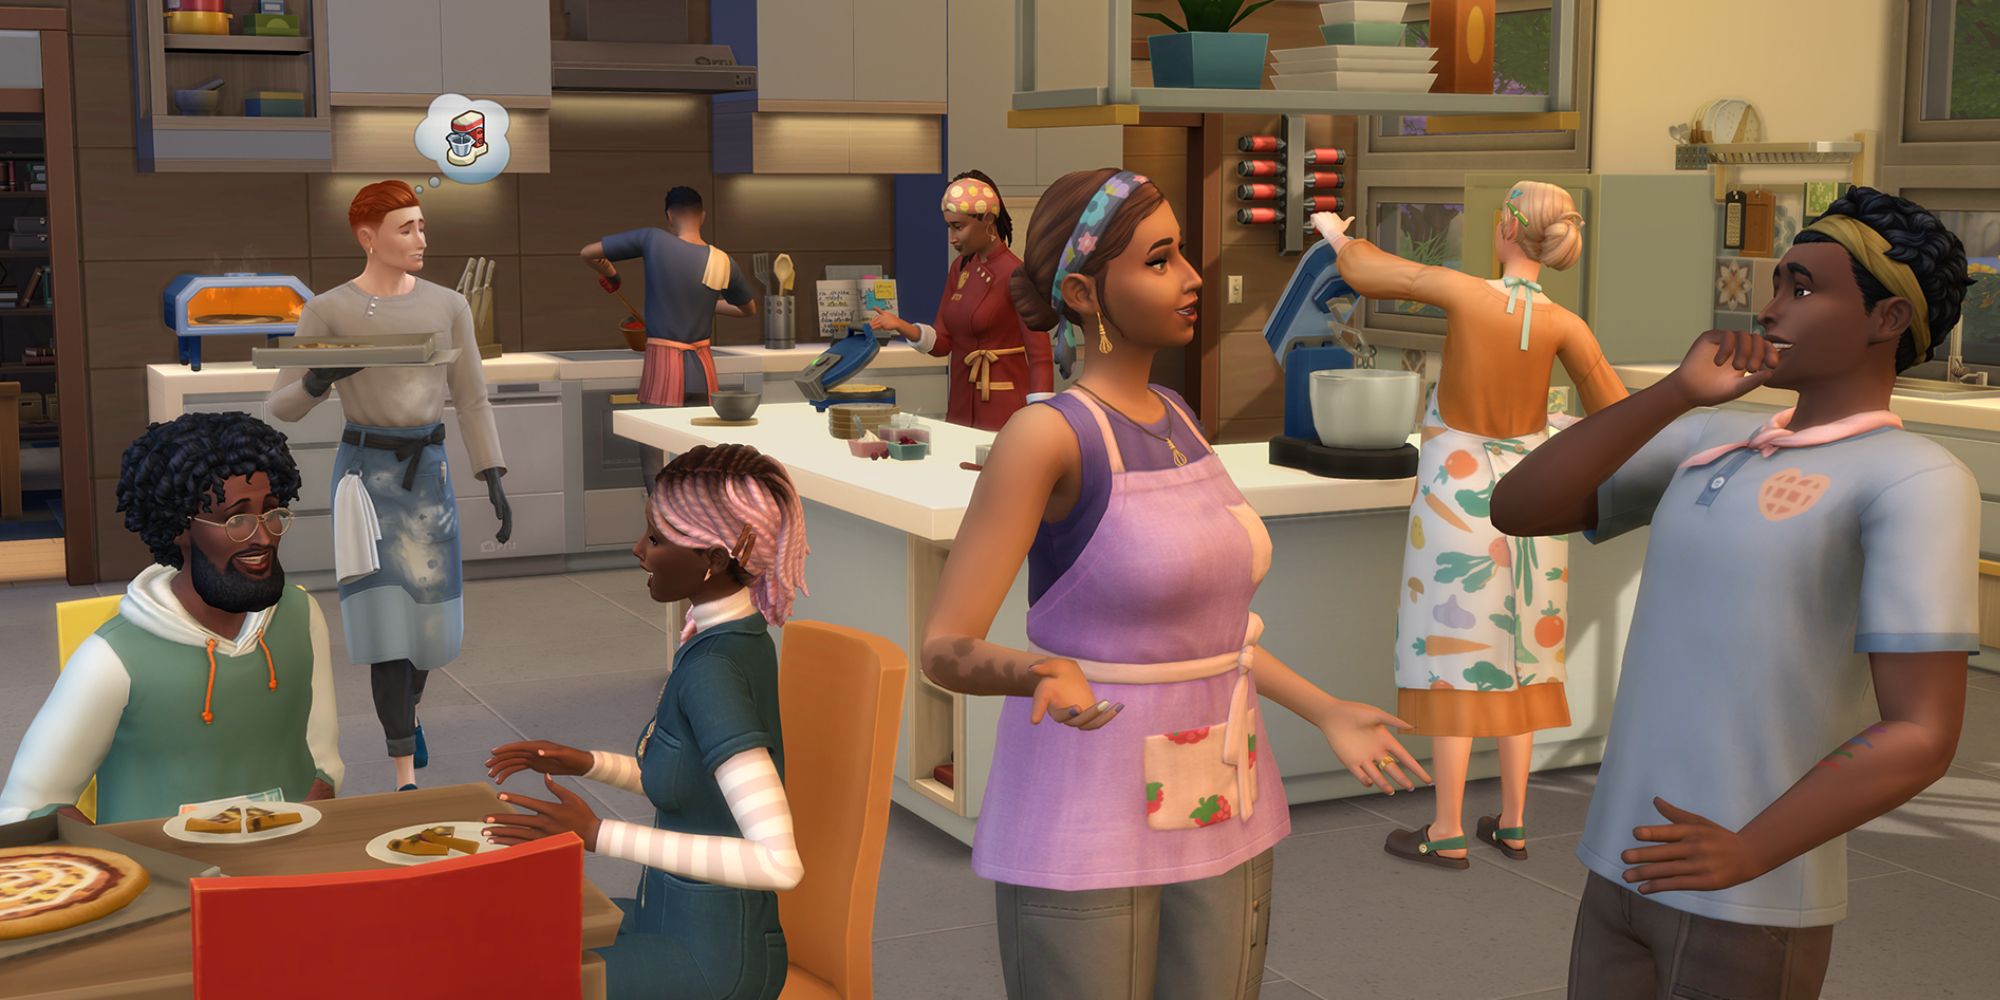 The Sims 4 home chef hustle a group of sims in a alrge kitchen, some eating and some cooking all laughing together